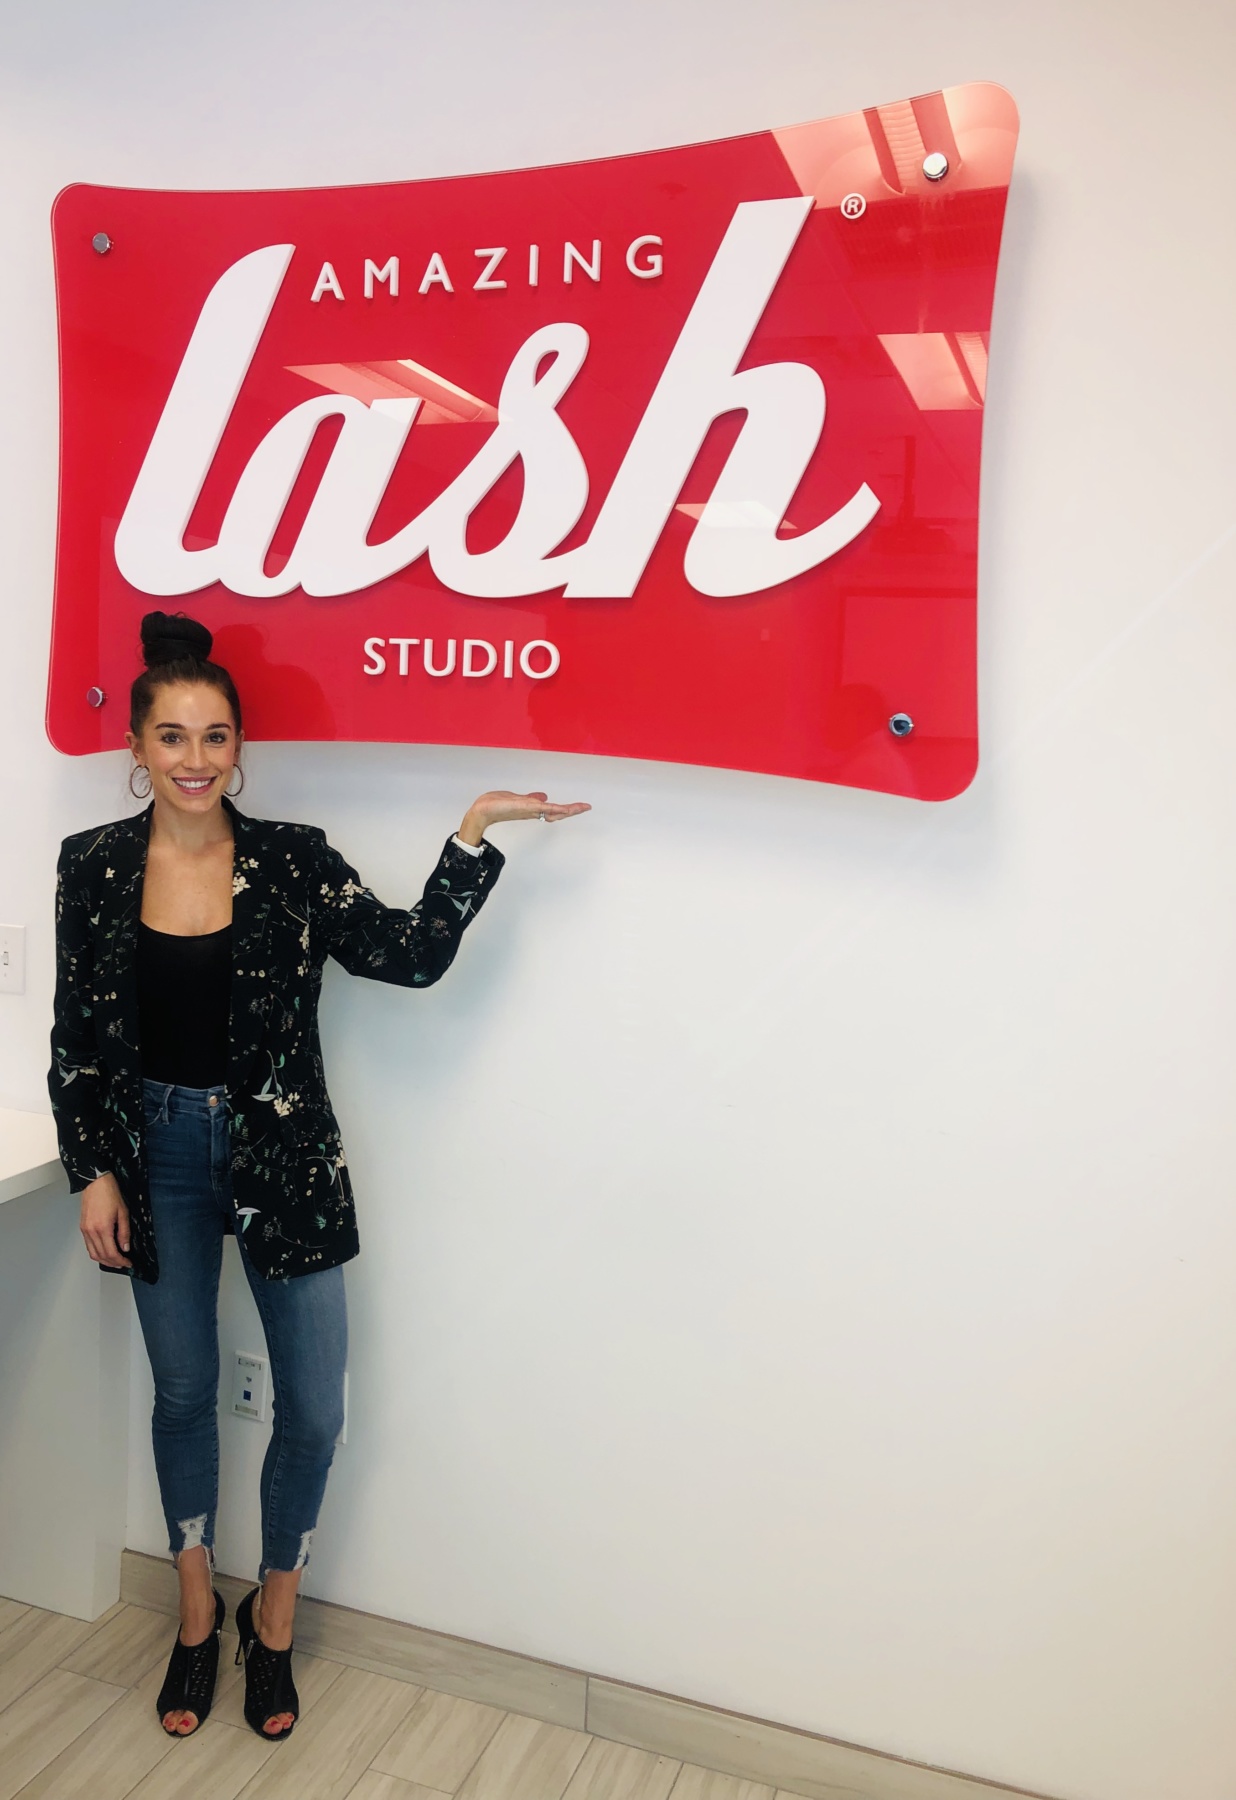 Amazing Lash Owner posing in front of lobby signage